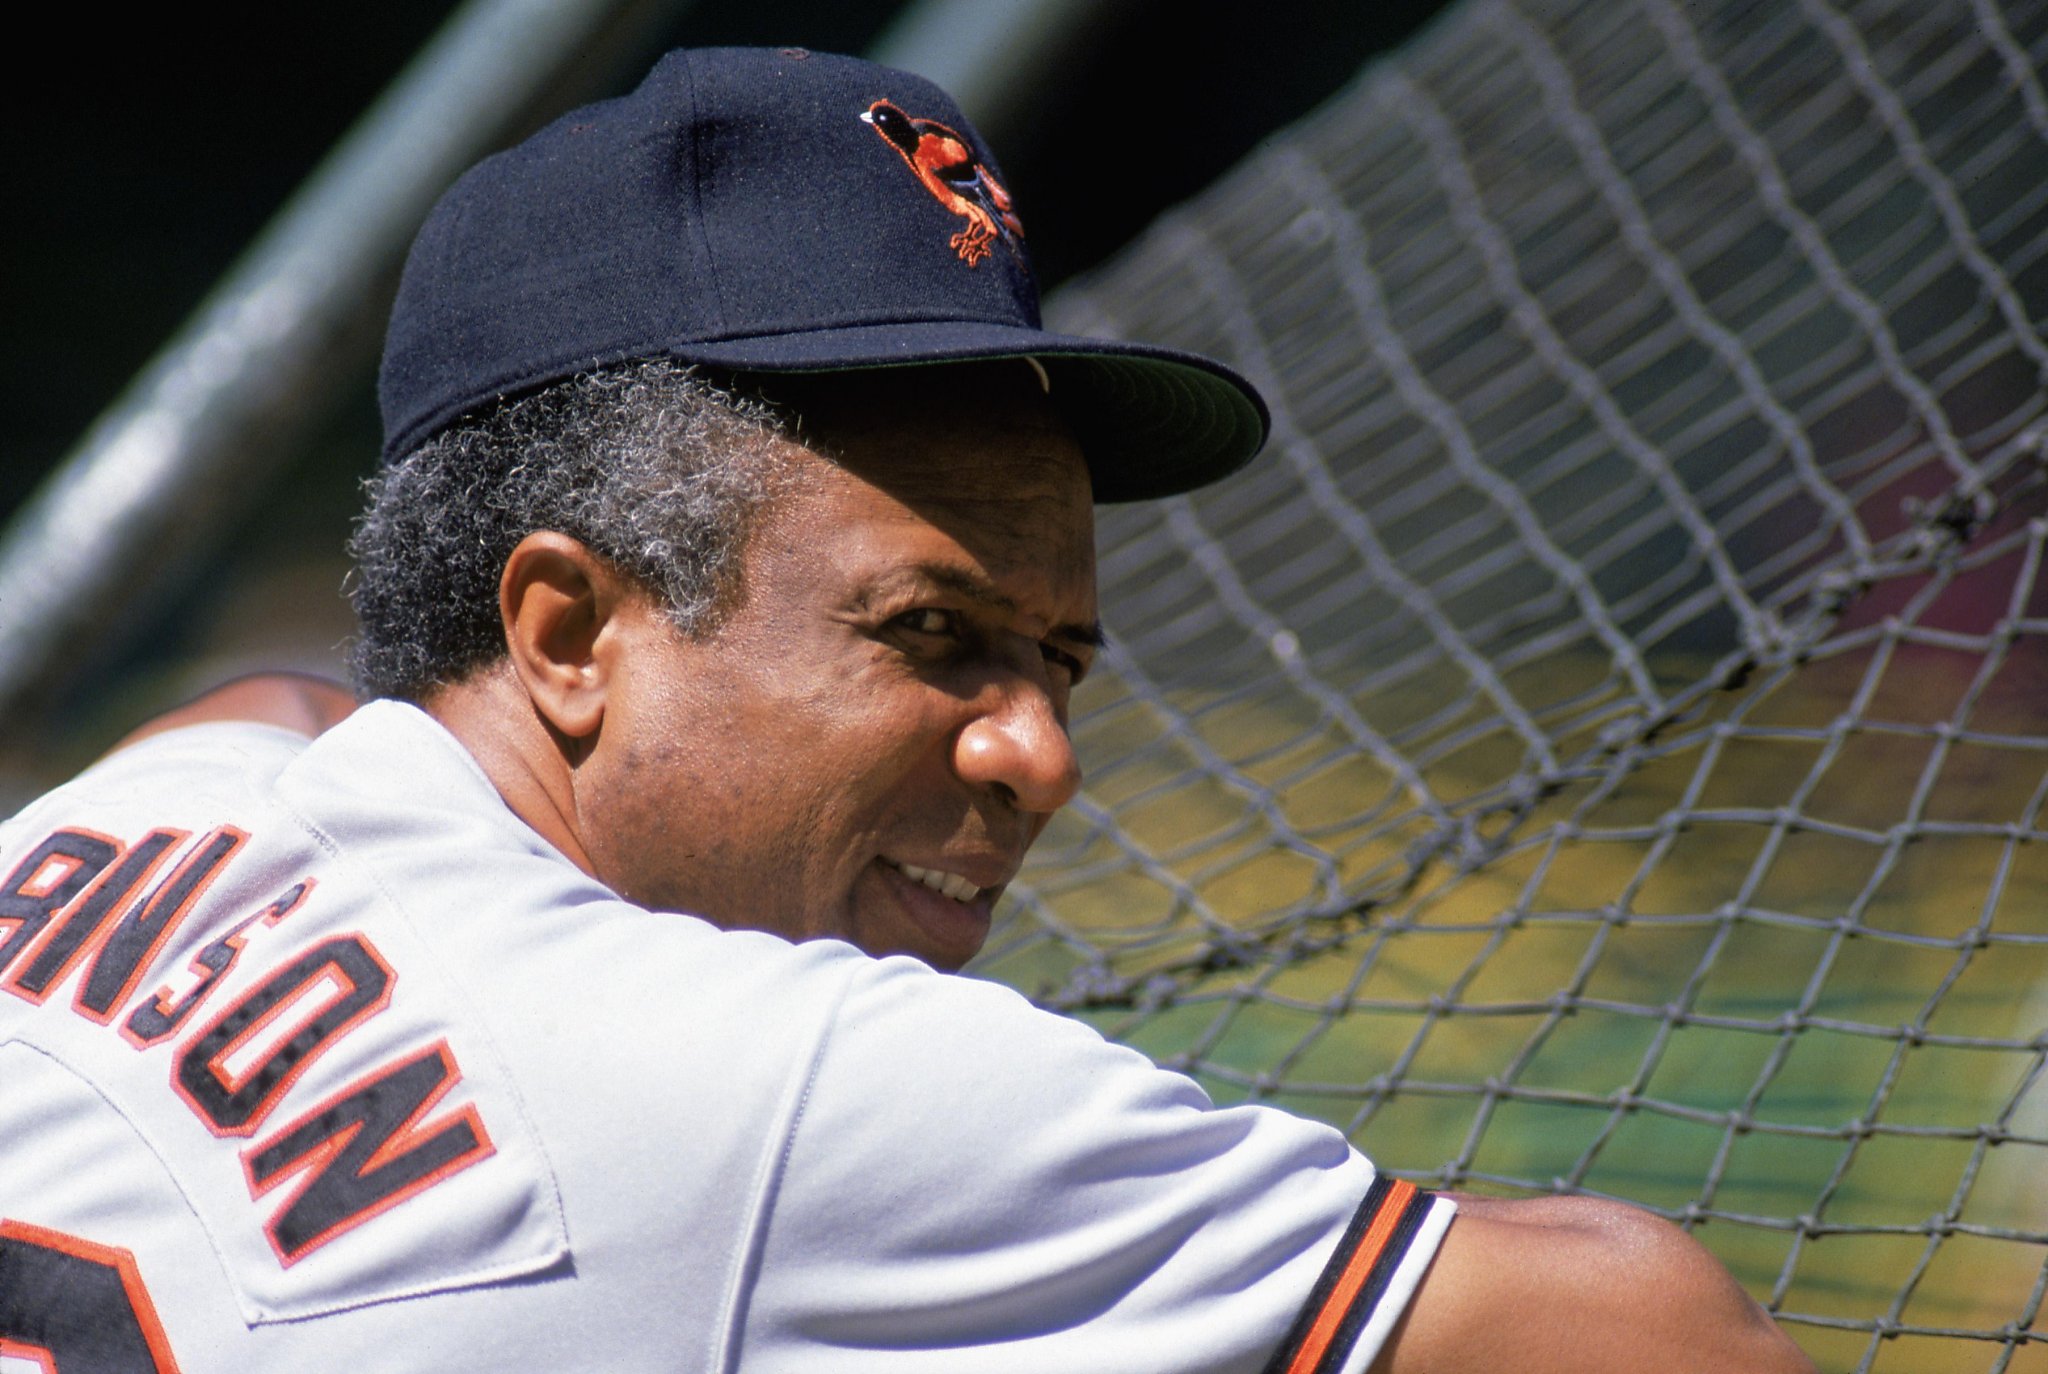 Remembering Frank Robinson, as a player and man